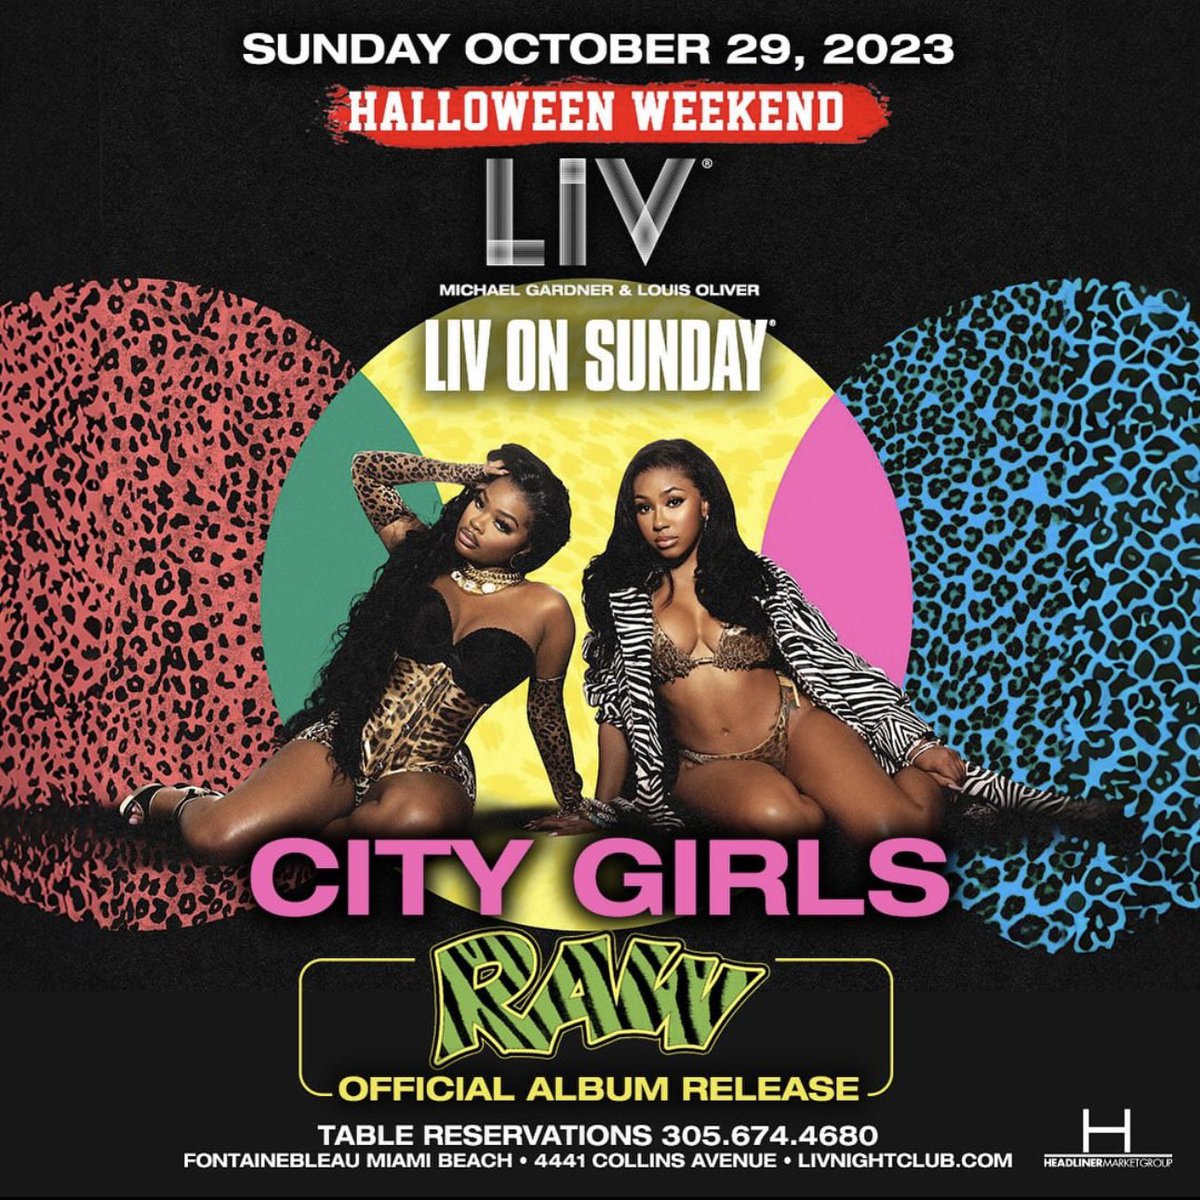 Sunday, October 29th! #HalloweenWeekend x #LIVOnSunday 🐅 @CityGirls Official ‘RAW’ Album Release Party at @LIVMiami 💅💖 Powered by @HeadlinerWorld 💜💛

#miami #party #hiphop #LiveMusic #albumrelease #headlinerworld #LIVMiami #citygirls #miaminights #miaminightlife